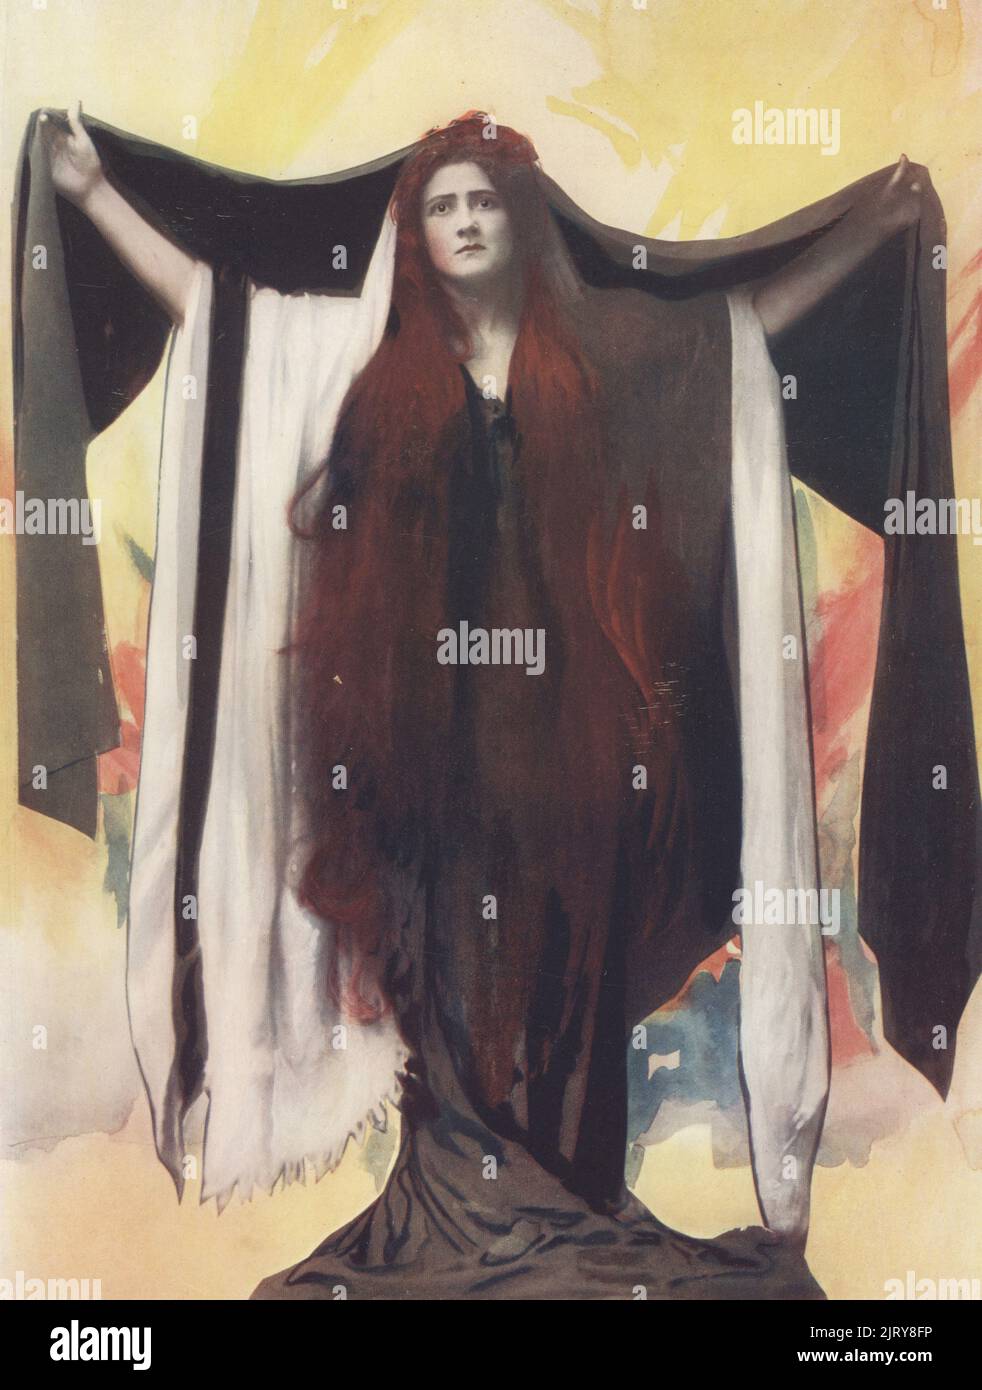 Miss Maud Jeffries as Mariamne in Herod: A Tragedy, a play by Stephen Phillips, 1901. In wild hair and voluminous robes as Herod's wife. Maud Evelyn Craven Jeffries, American actress and beauty, 1869-1946. Photograph by Langfier. Colour printing of a hand-coloured illustration based on a monochrome photograph from George Newnes’s Players of the Day, London, 1905. Stock Photo